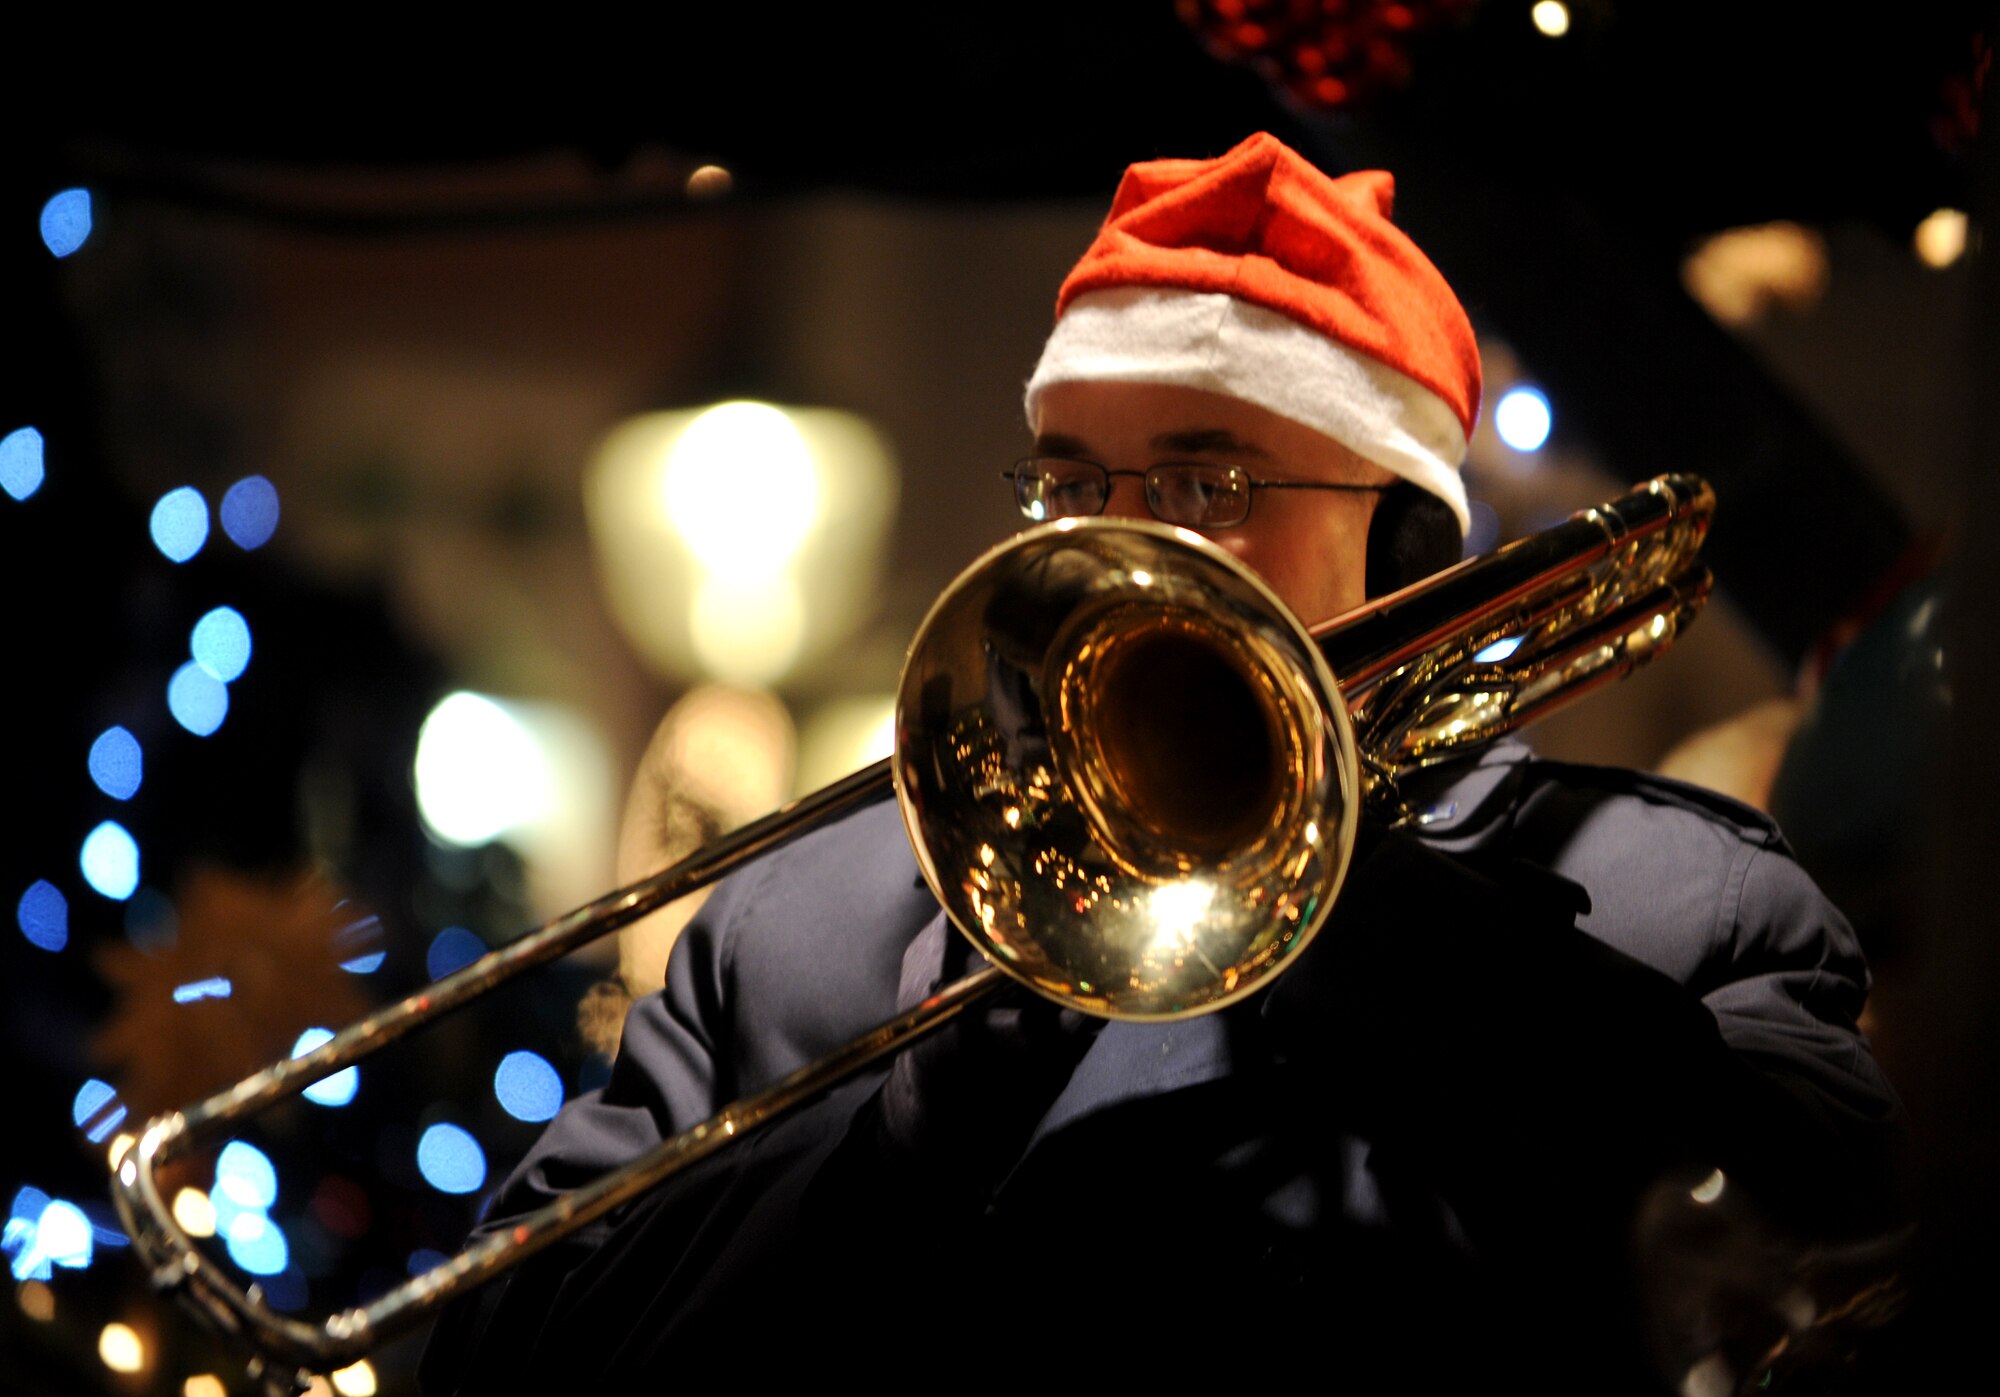 TRIER, Germany -- Staff Sgt. Frank Gourley, U.S. Air Forces in Europe Band trombonist, plays “Jingle Bells” during a live performance by Five Star Brass Dec. 17 at the Trier Christmas Market. The USAFE band entertained Germans and Americans at the market with holiday songs. (U.S. Air Force photo/Airman 1st Class Nathanael Callon)